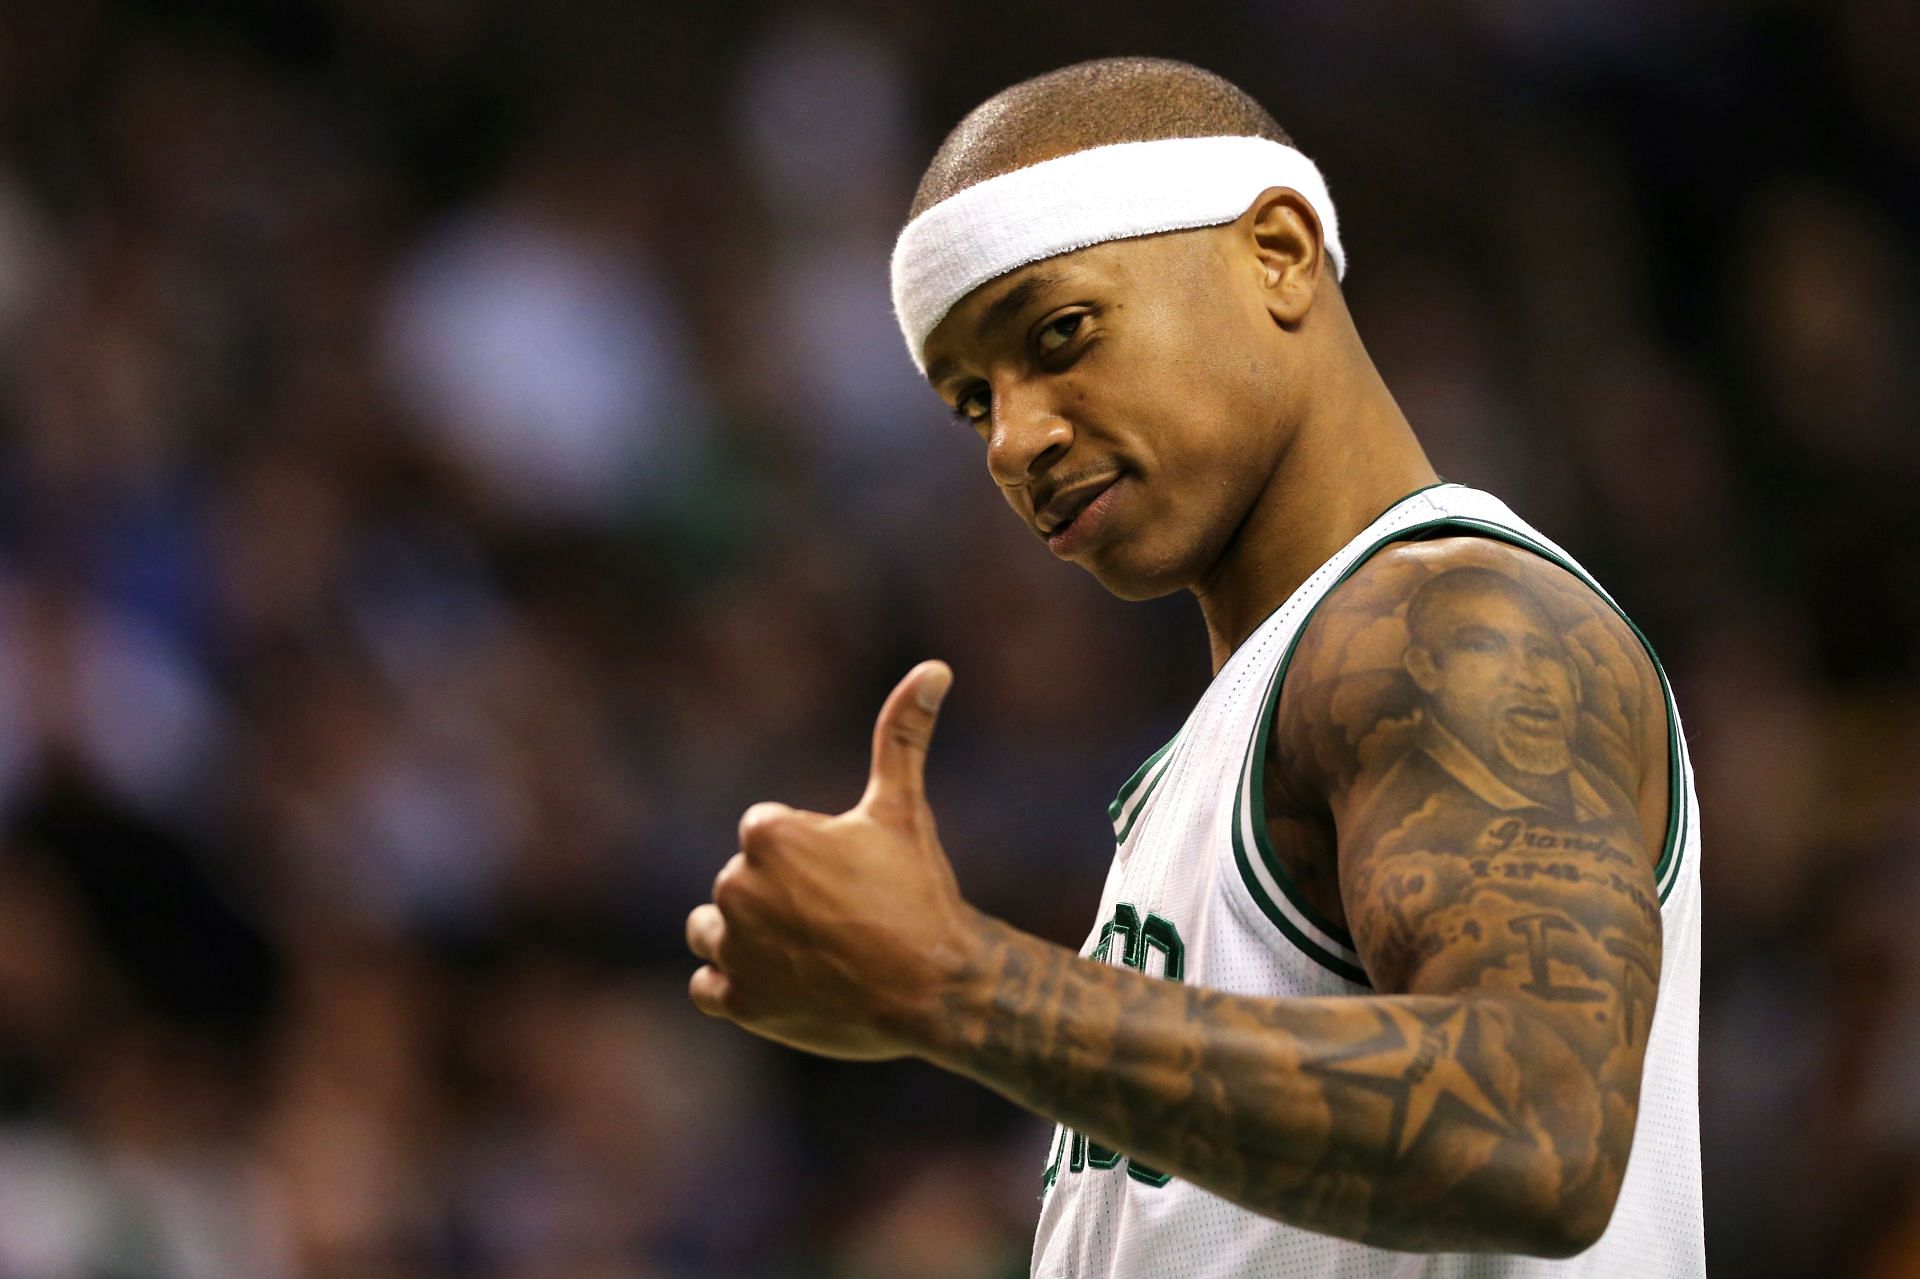 NBA veteran Isaiah Thomas has signed a contract with the Los Angeles Lakers